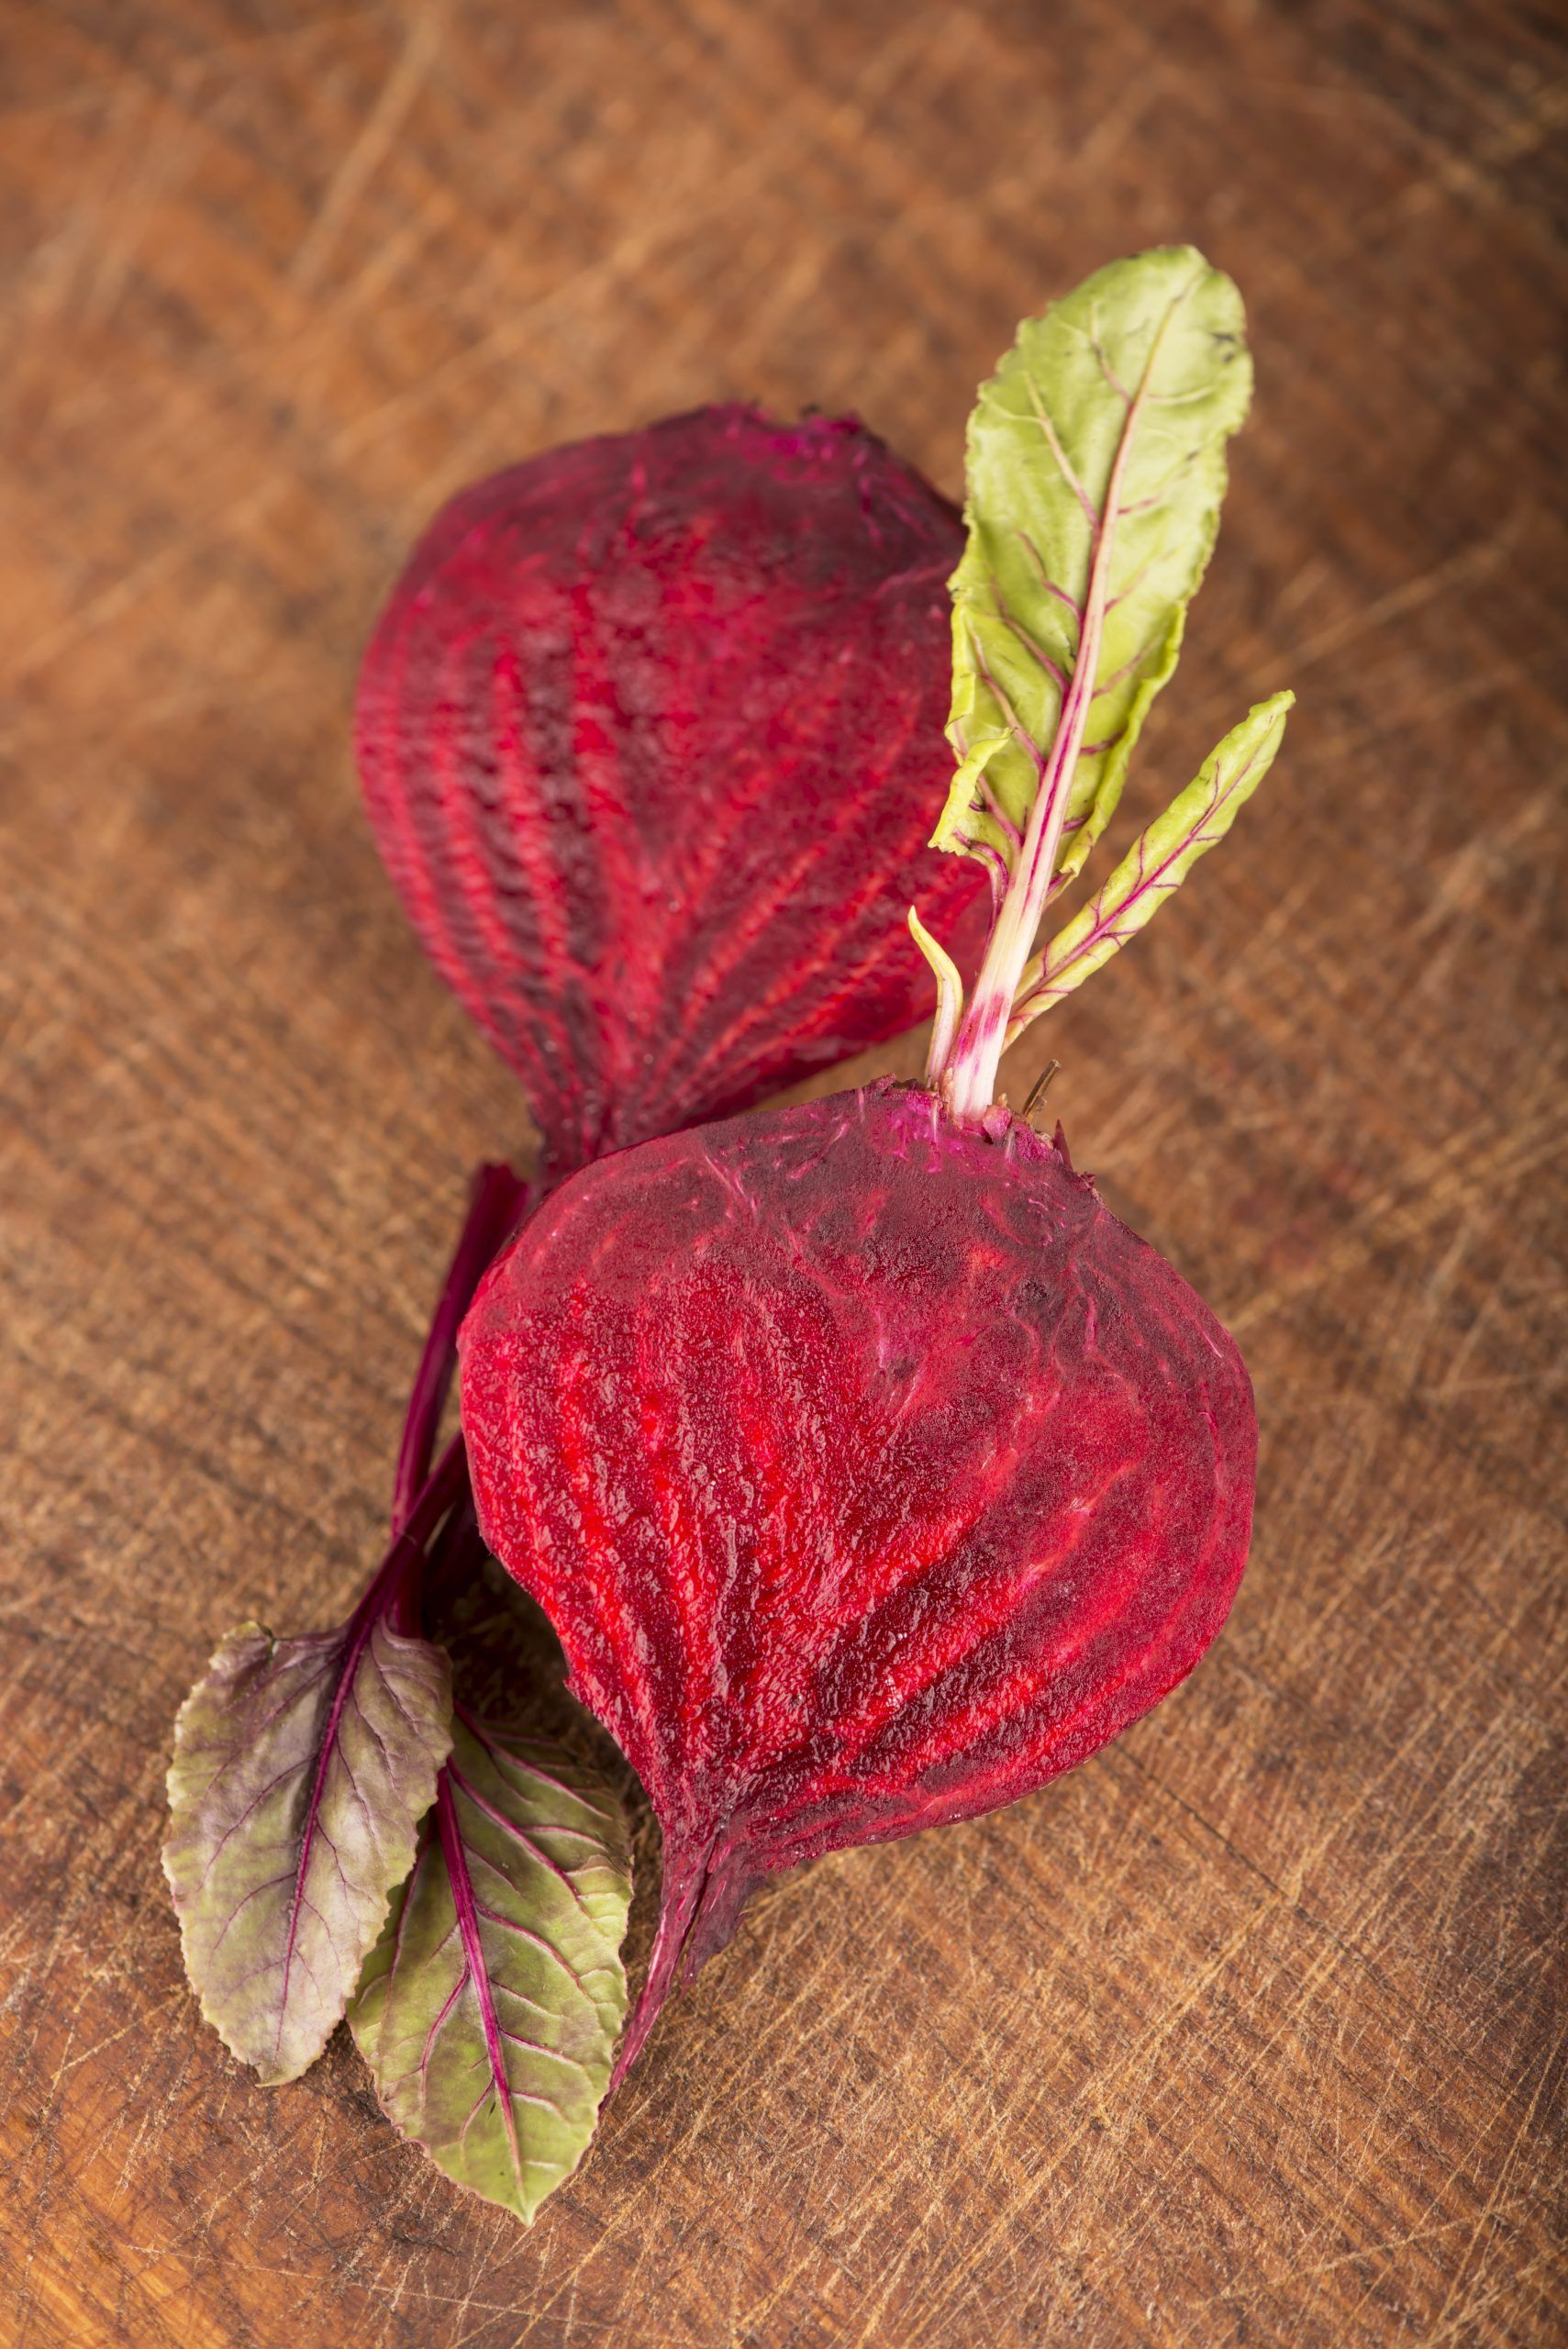 Beetroot Juice May Help COPD Sufferers Exercise Longer